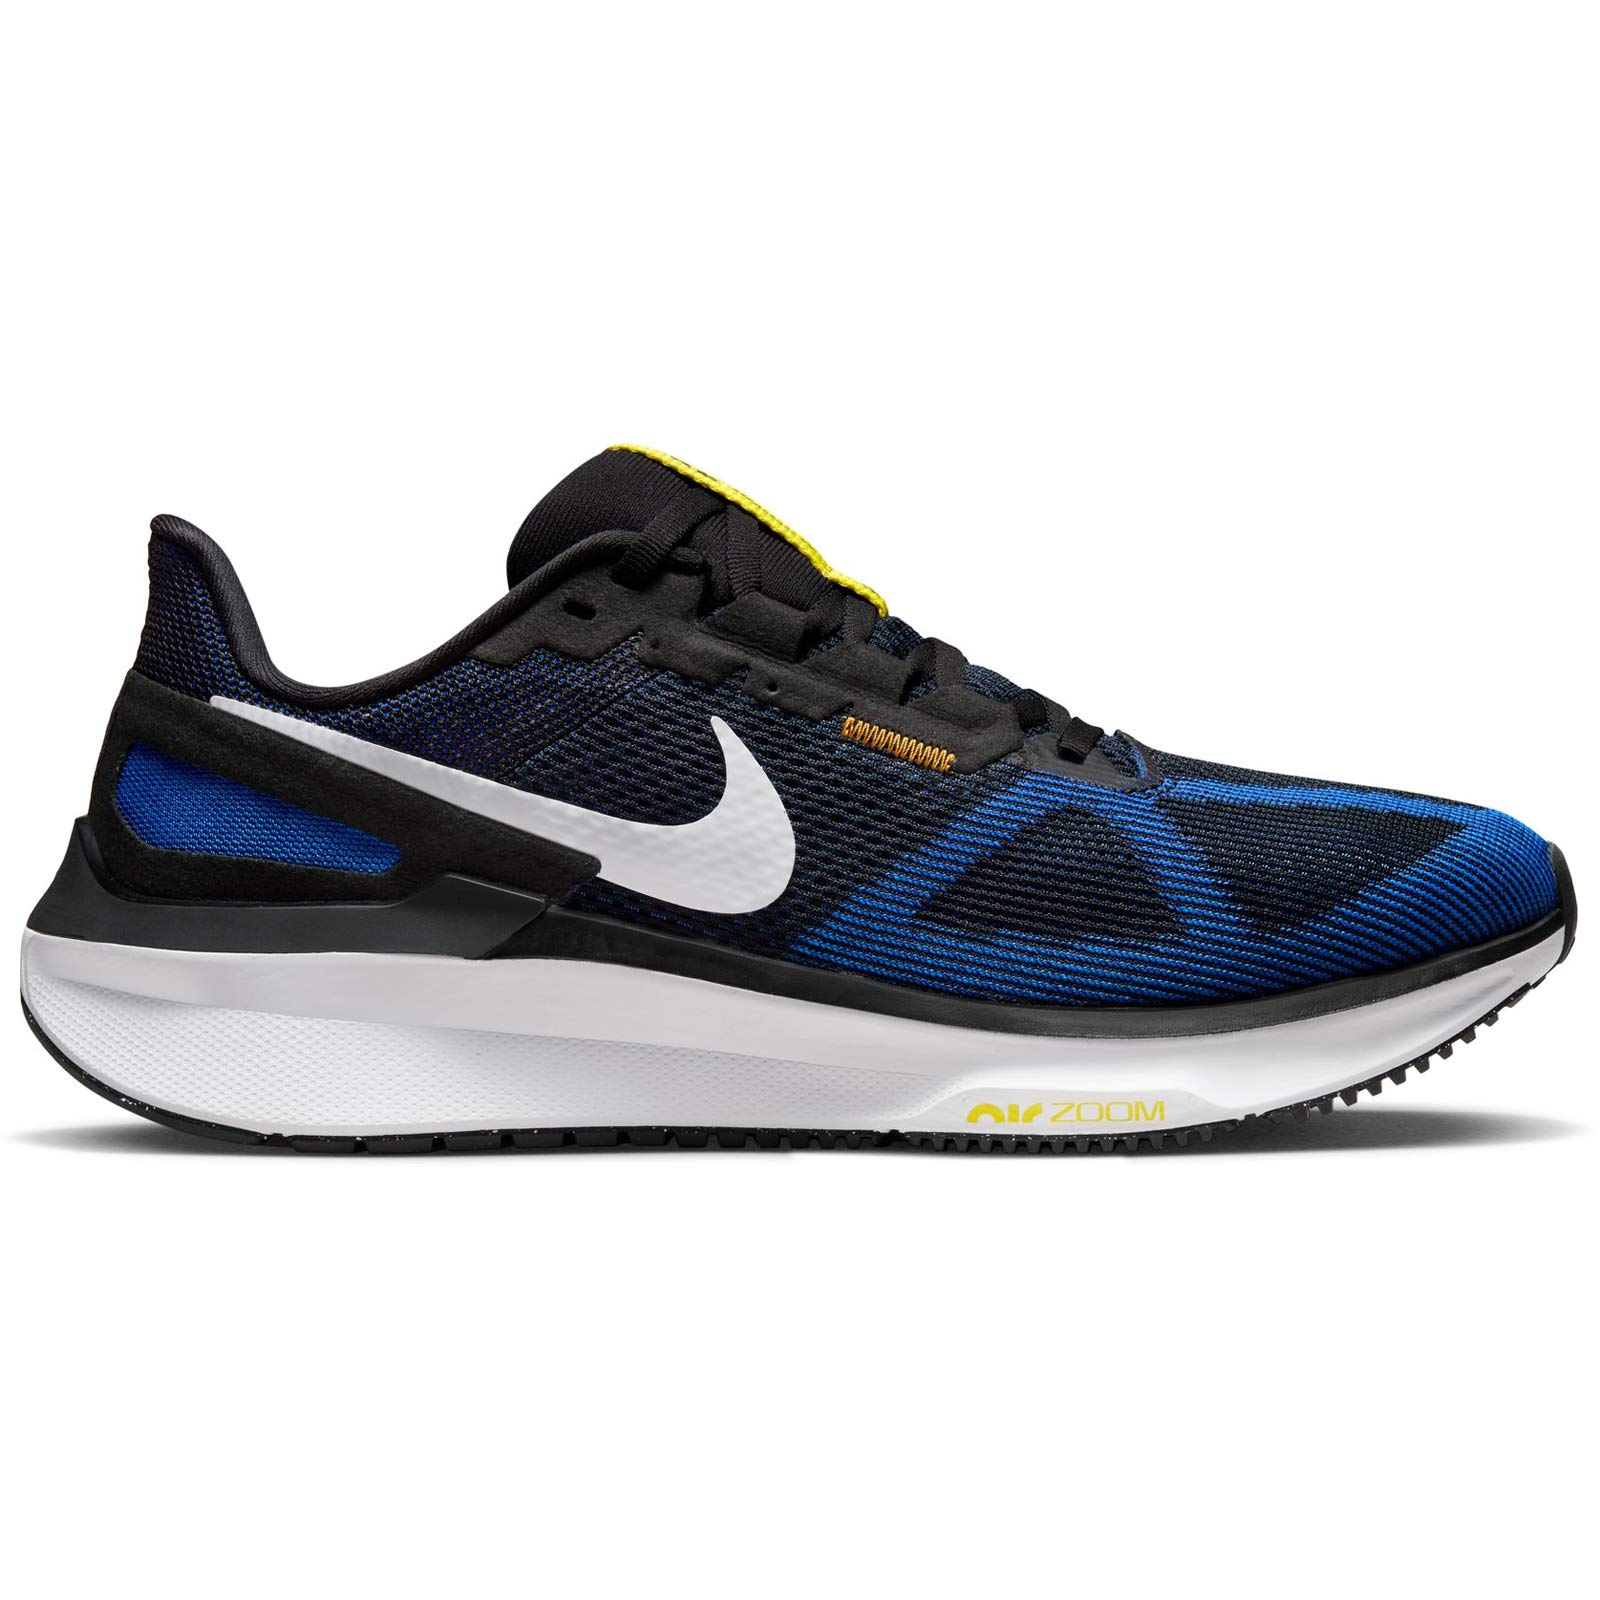 Nike Structure 25 Mens Road Running Shoes, Men's Running, Running Shop All, Running & Fitness, Elverys